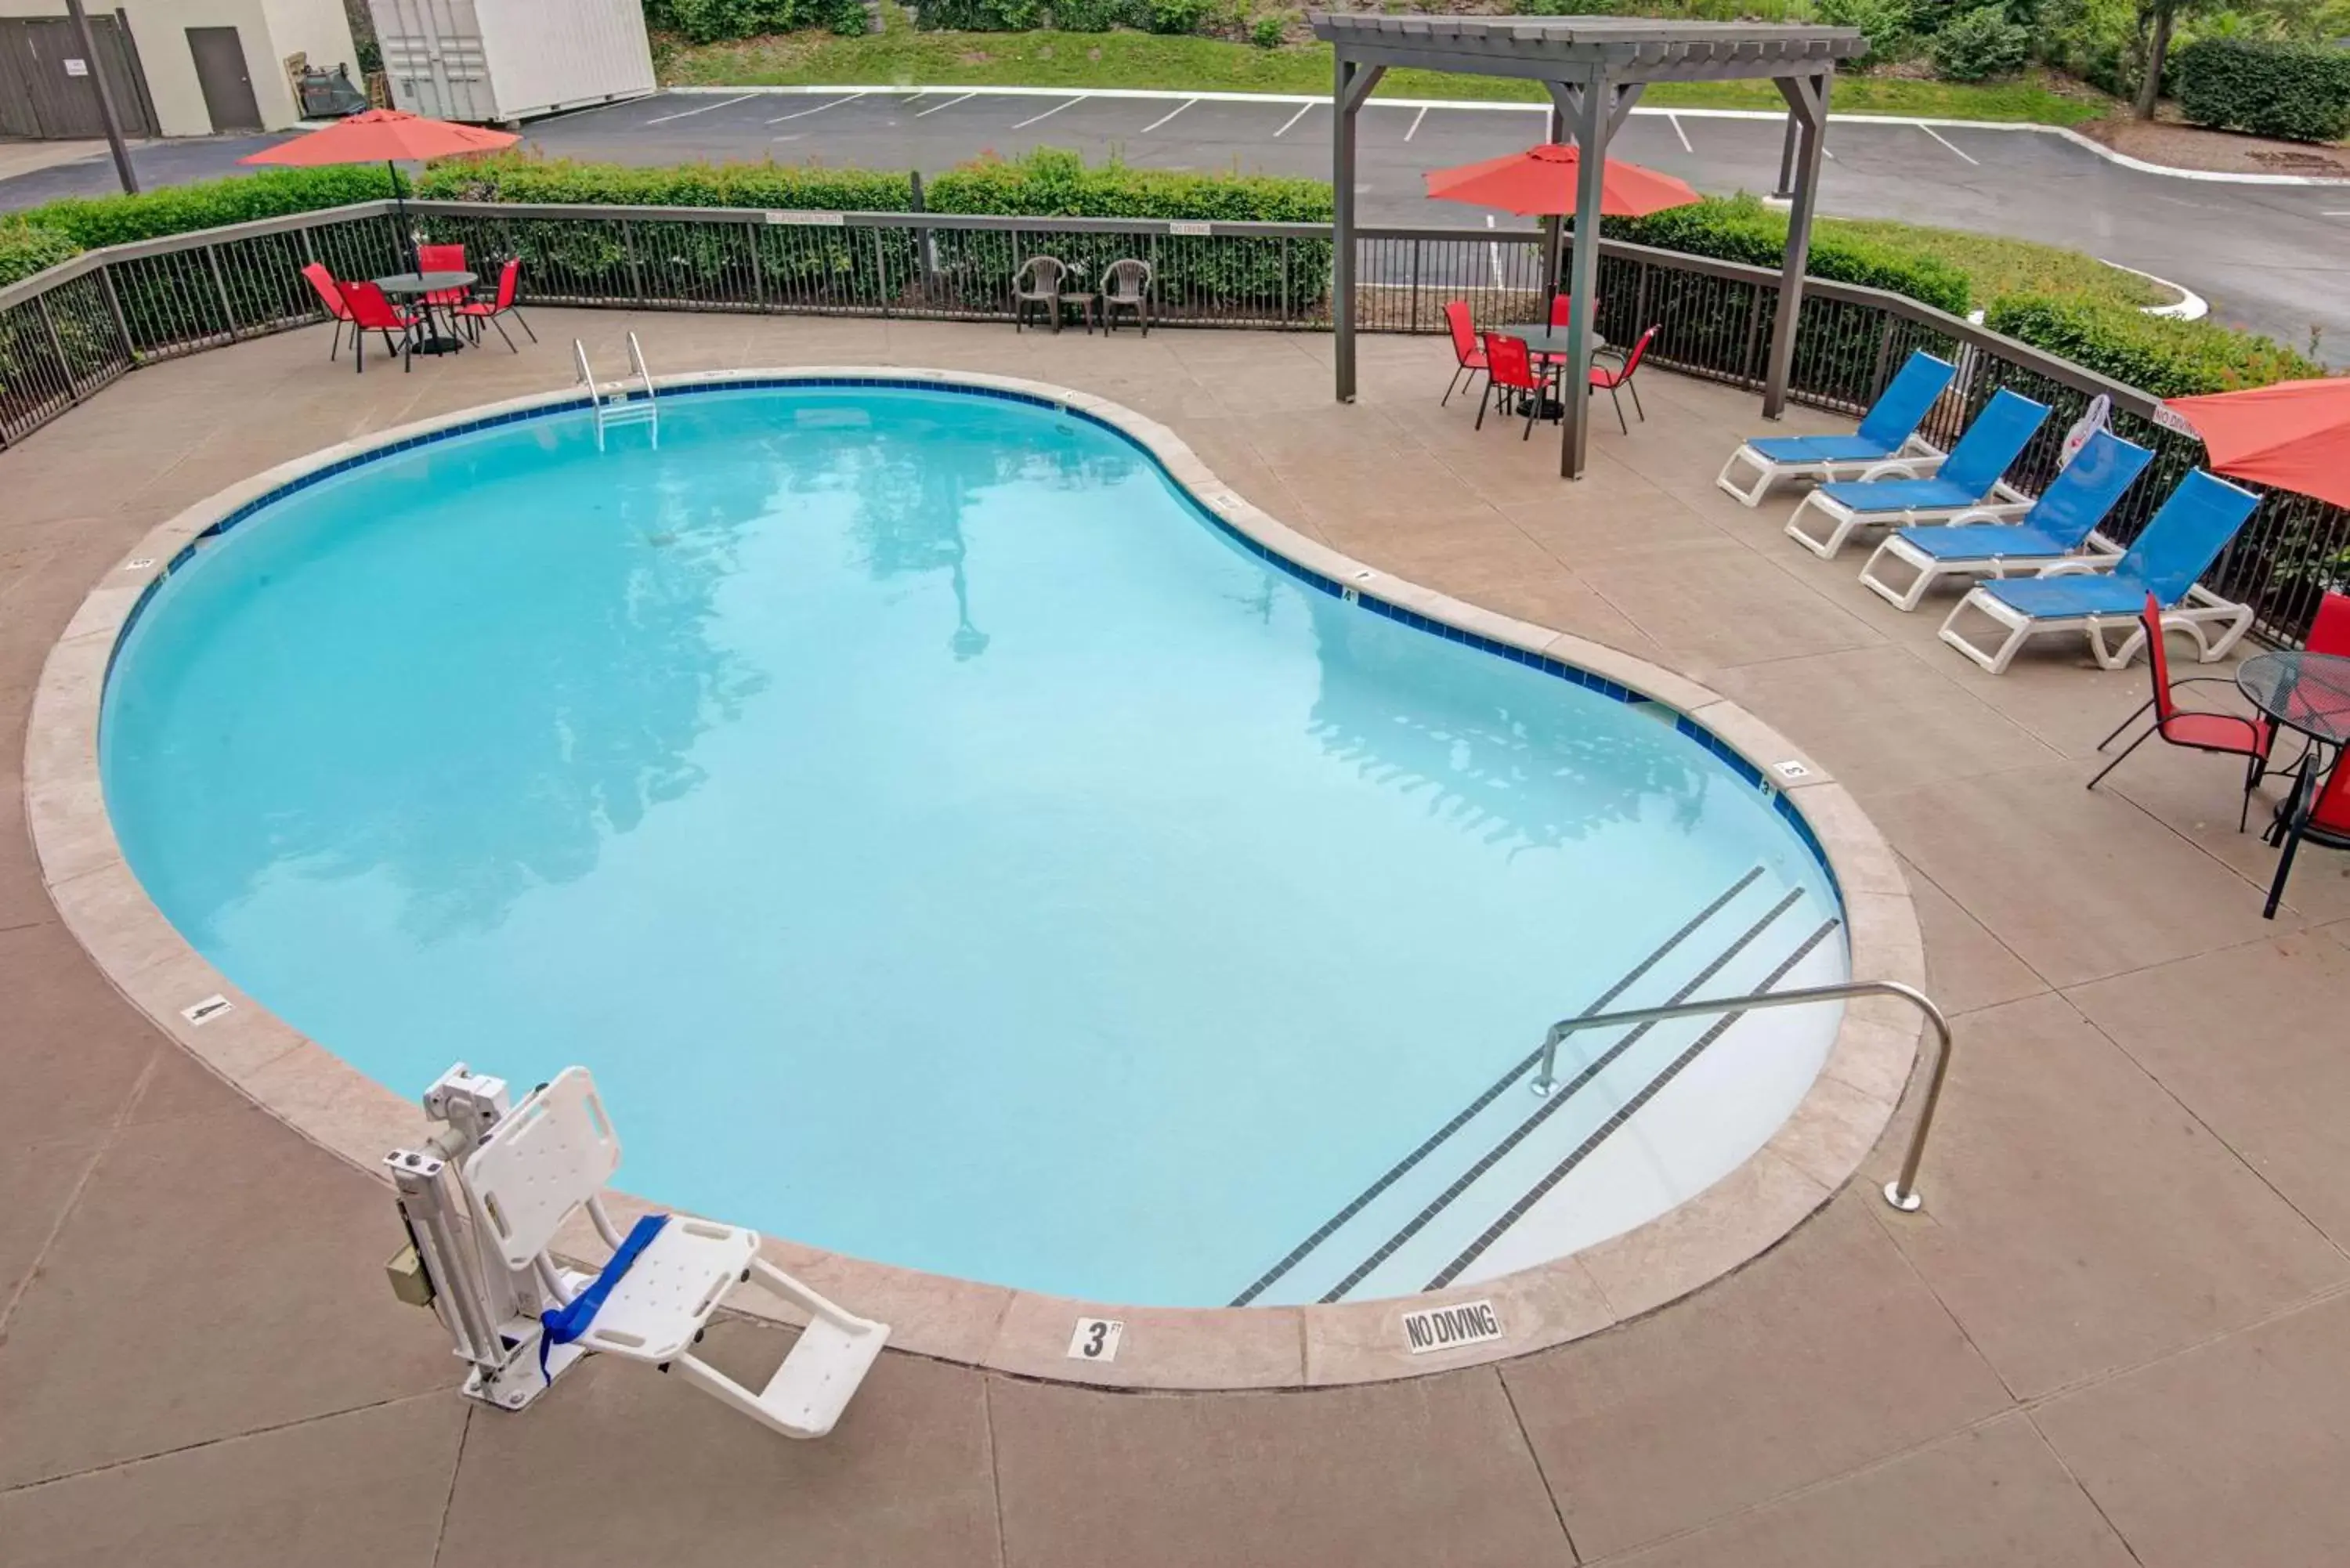 On site, Pool View in Baymont by Wyndham Nashville Airport